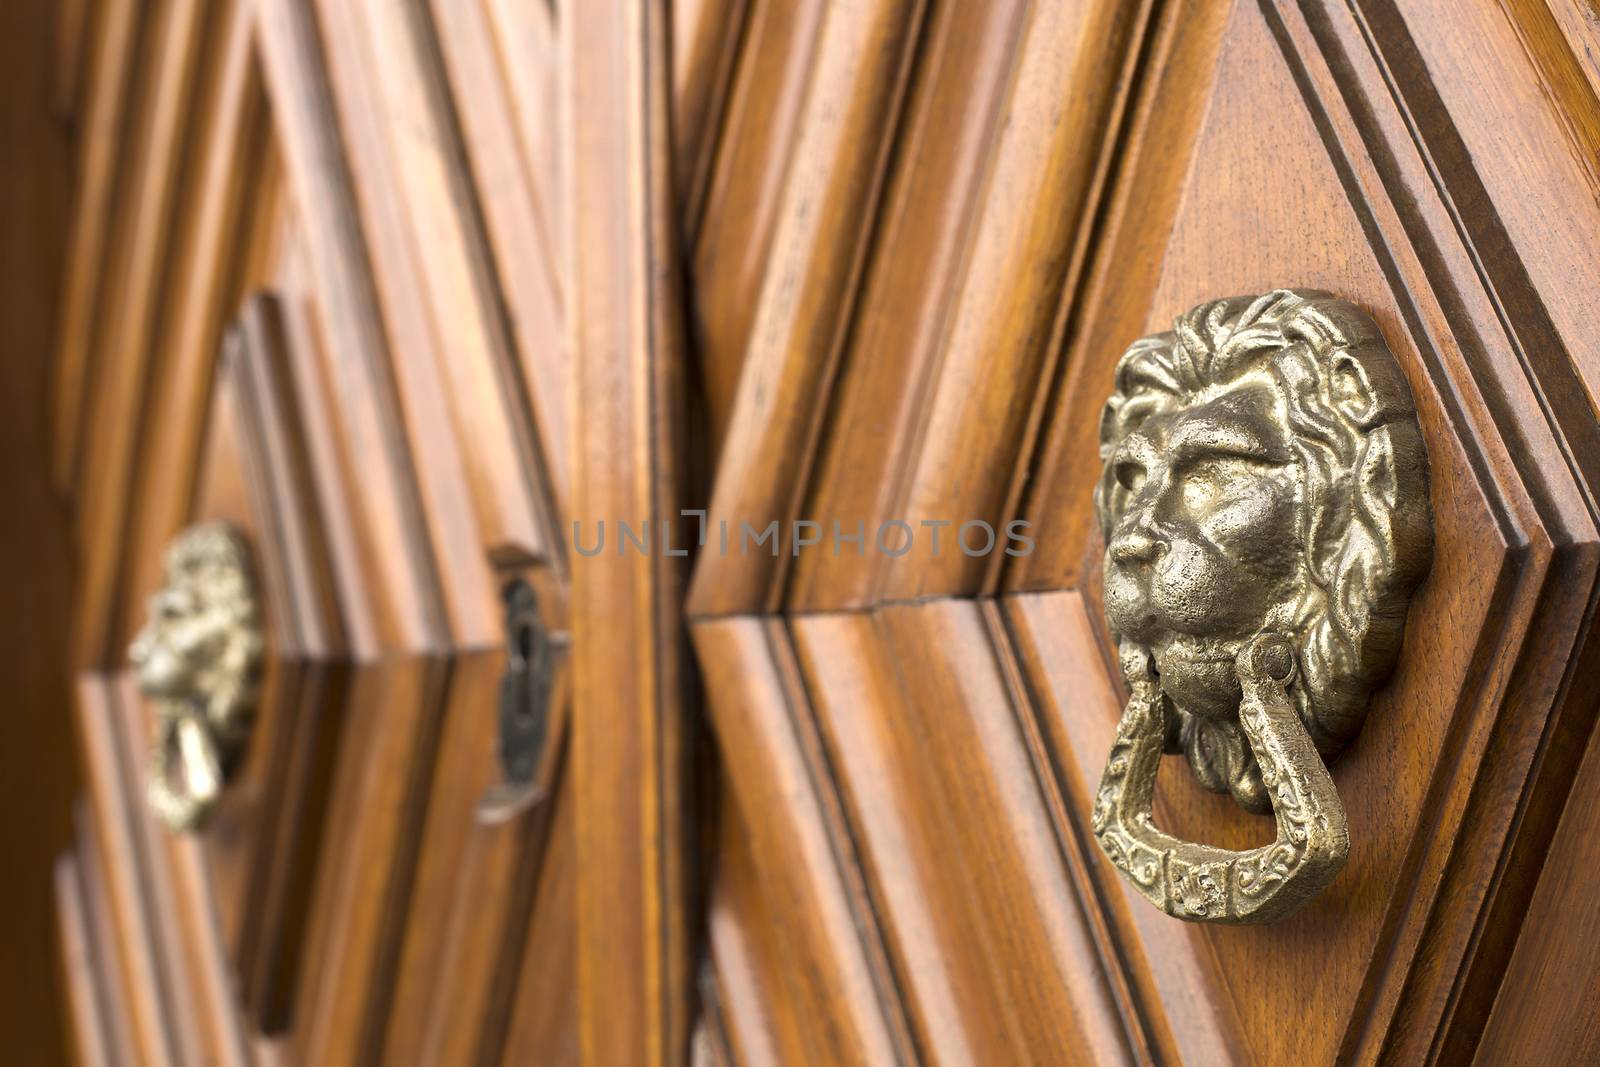 Lion head knockers by photosampler